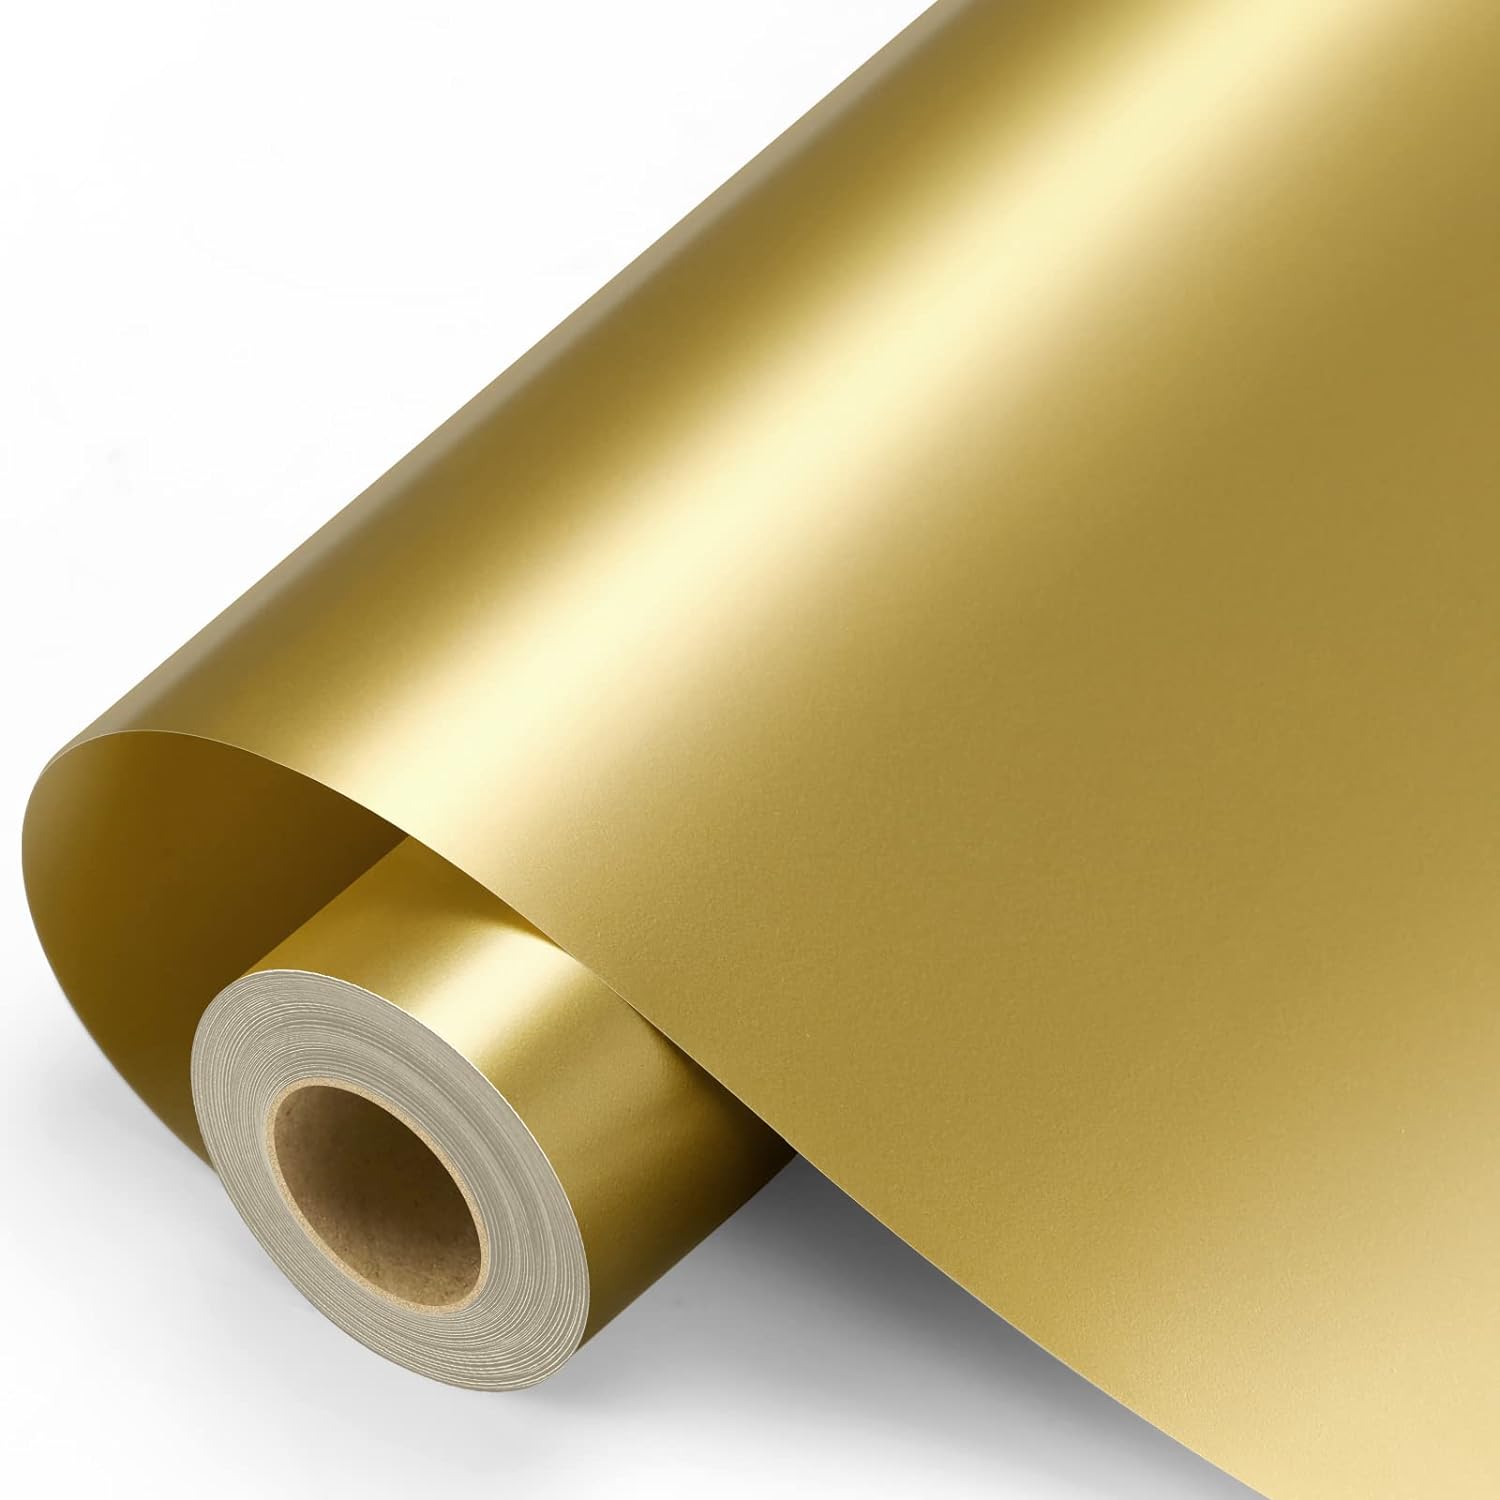 Gold Permanent Vinyl - 12 x 11FT Gold Vinyl with PET Backing Easy to Weed, Adhesive Vinyl Roll for All Cutting Machine, Permanent Outdoor Vinyl for Home Decor, Car Decal, Scrapbooking, Glossy